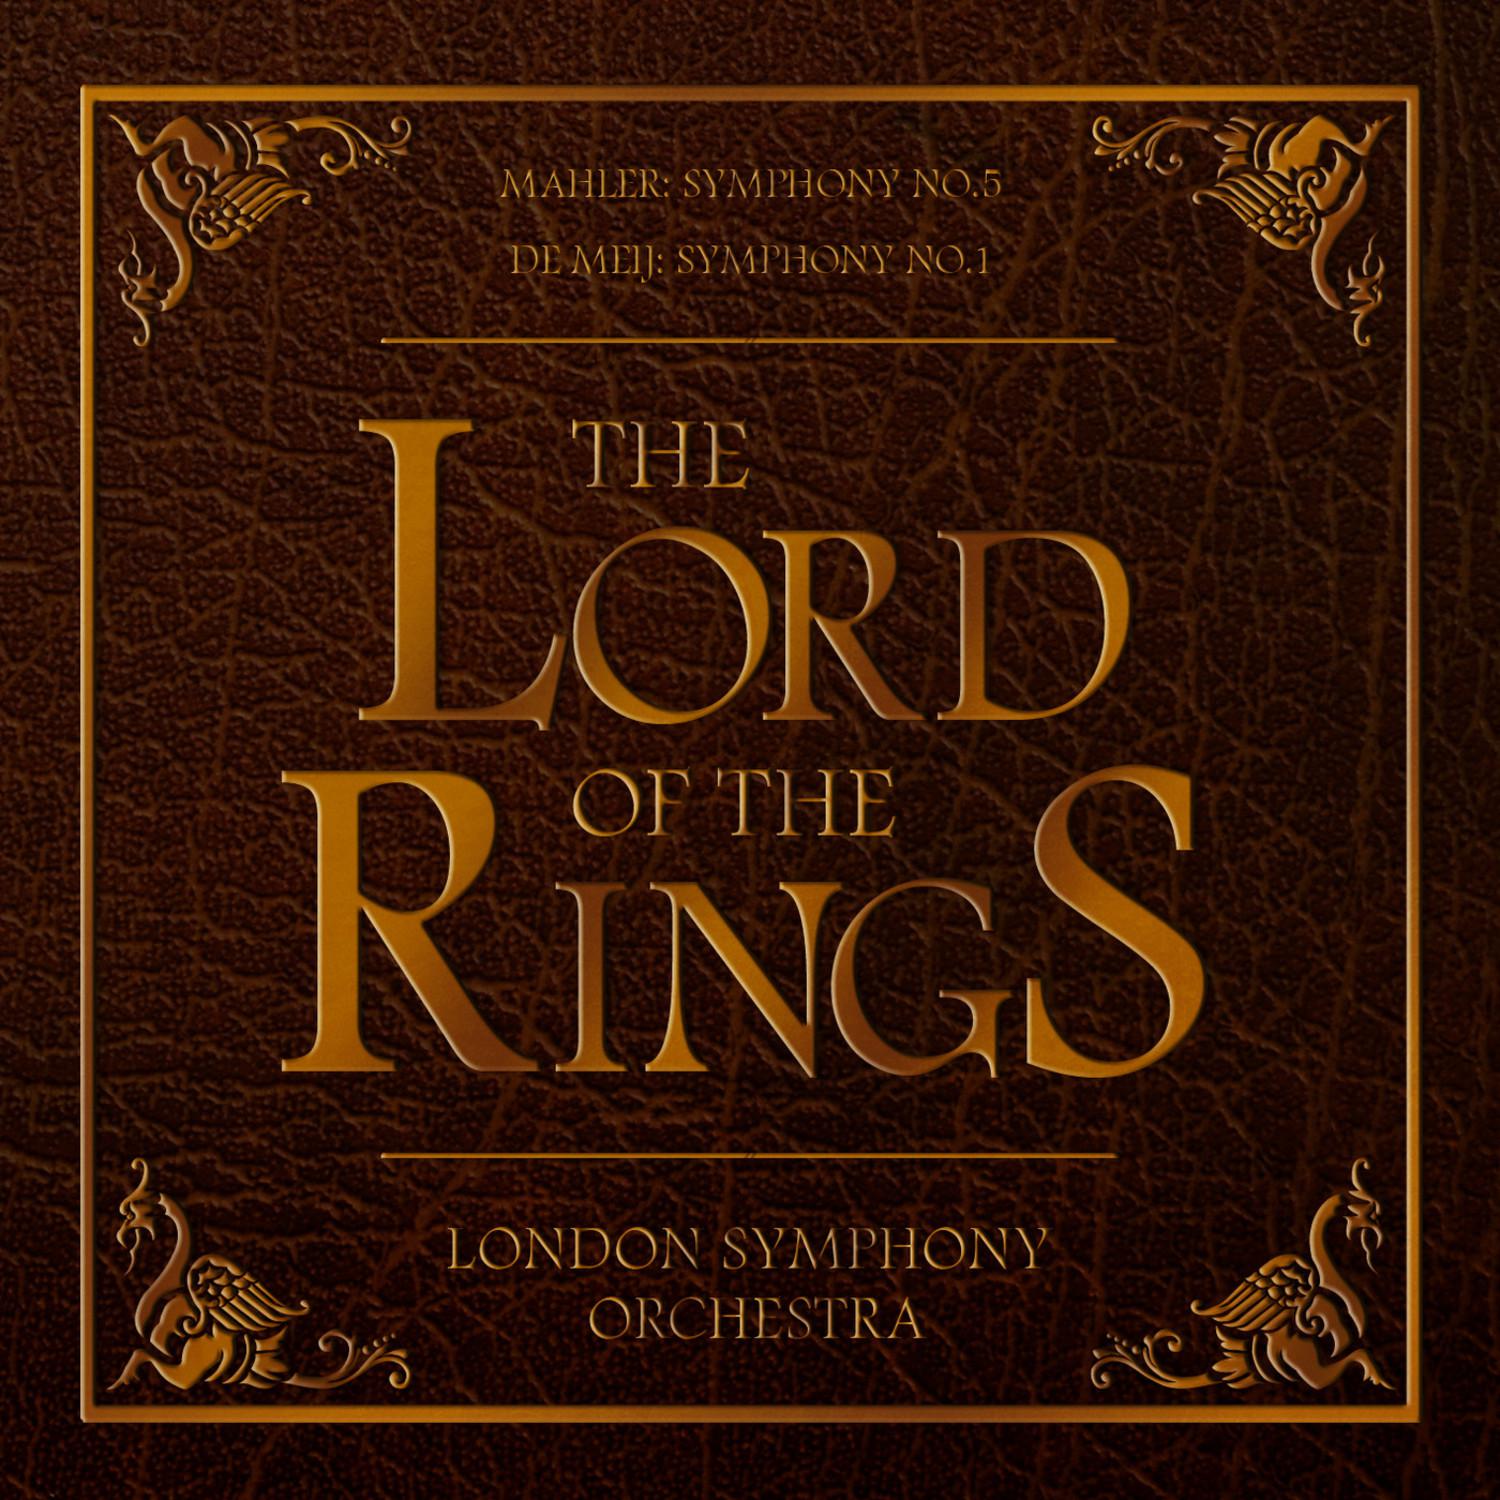 Symphony No. 1, "The Lord of the Rings": V. Hobbits